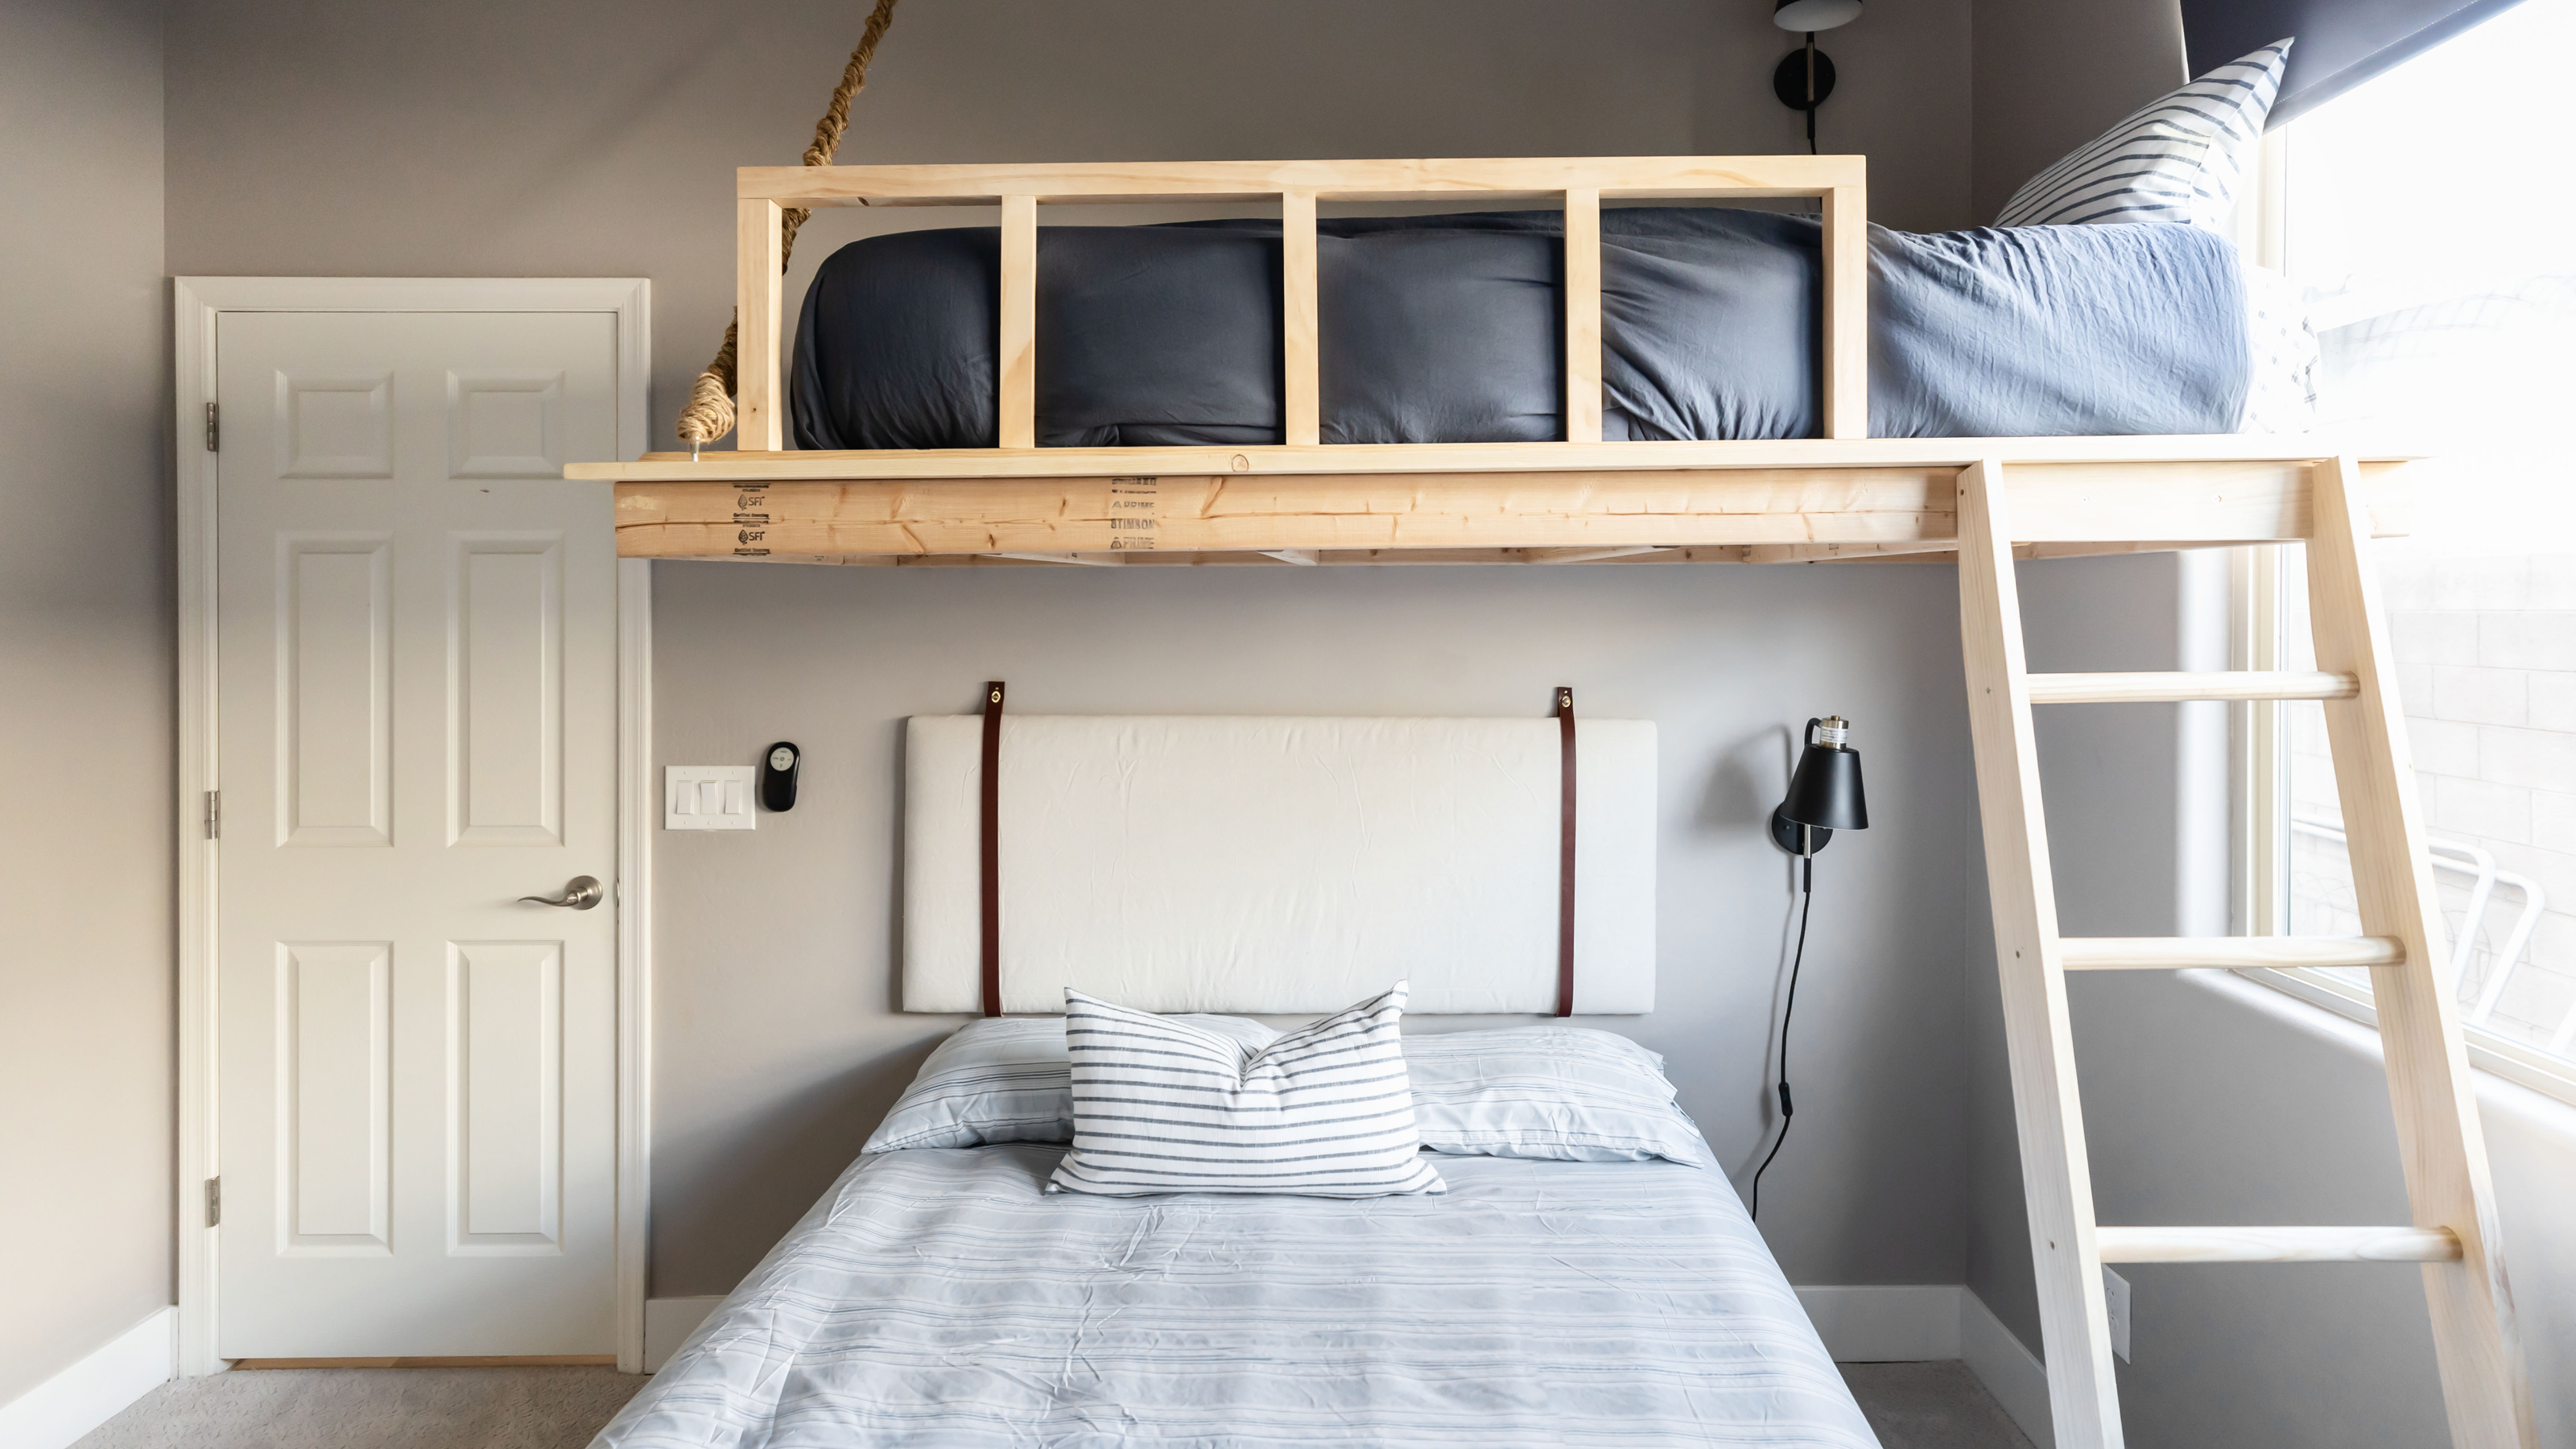 How To Build A Loft Bed Diy With This, How To Make A Loft Bed Look Nice